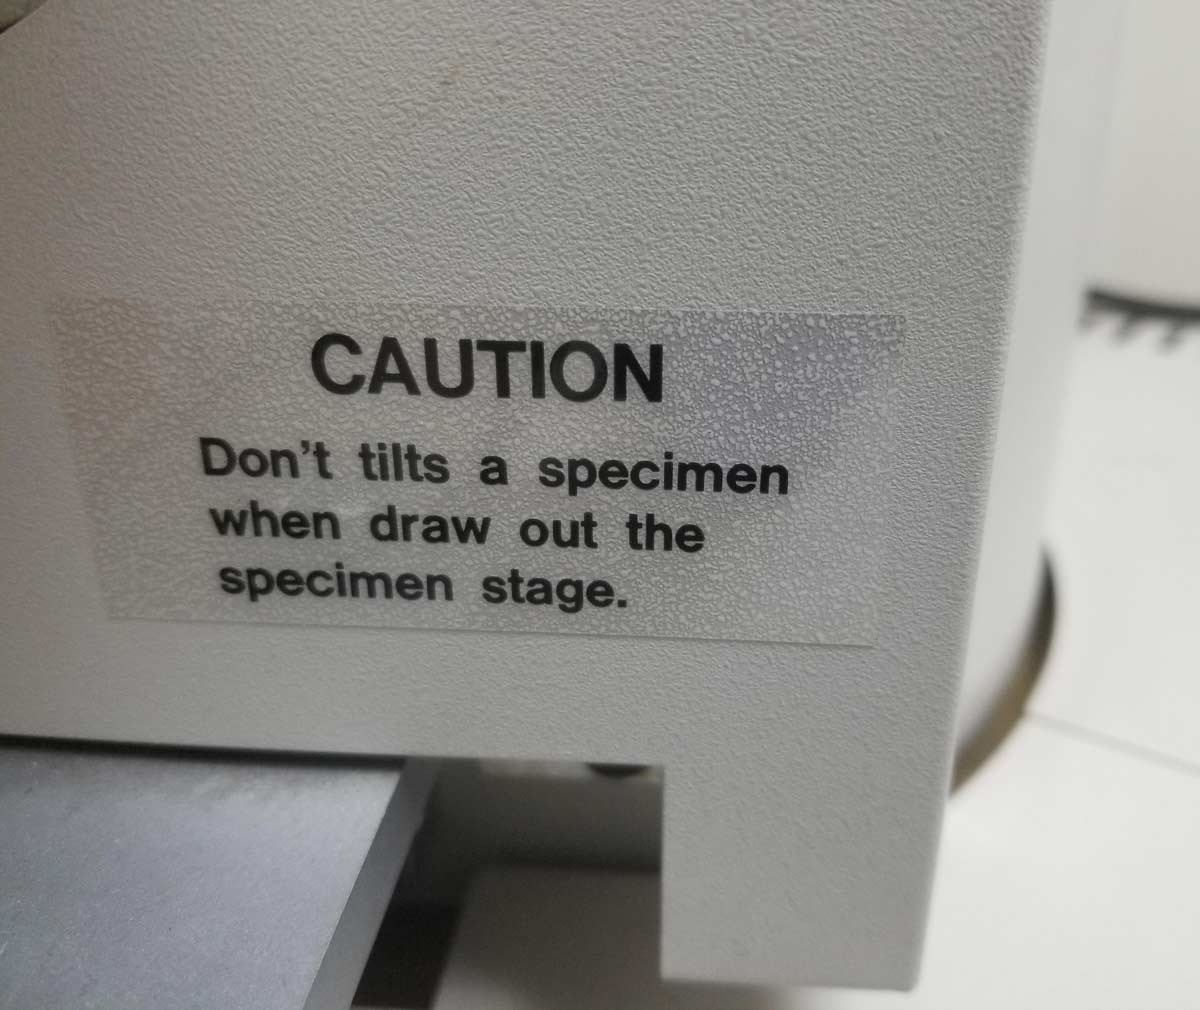 Most of the equipment at my work is made overseas, so the grammar in the instructions is questionable at times